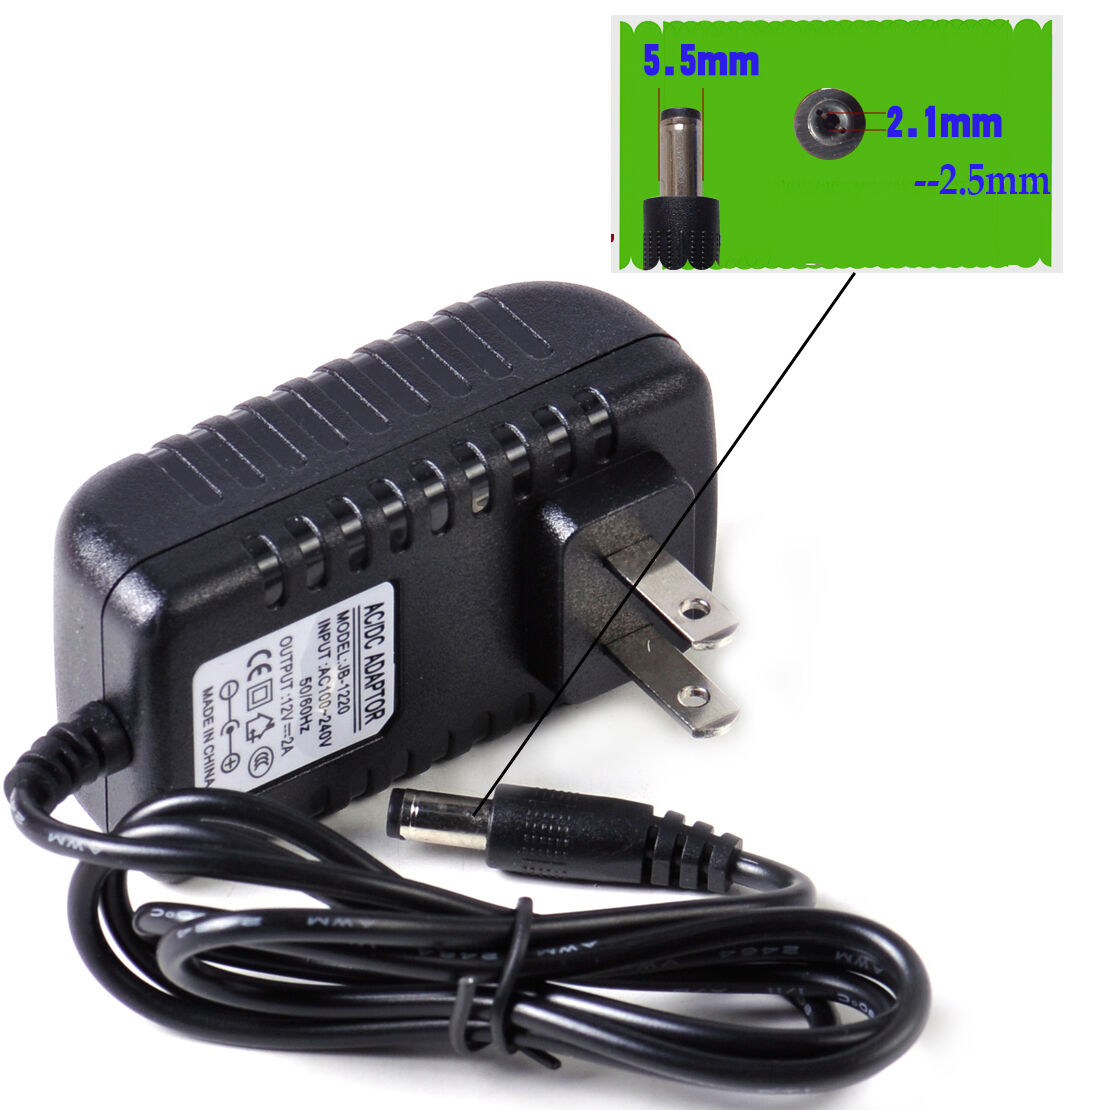 12V/2A Power Supply AC To DC Adapter US Plugs Converter For CCTV Security Camera Features: Dimmable Connec - Click Image to Close